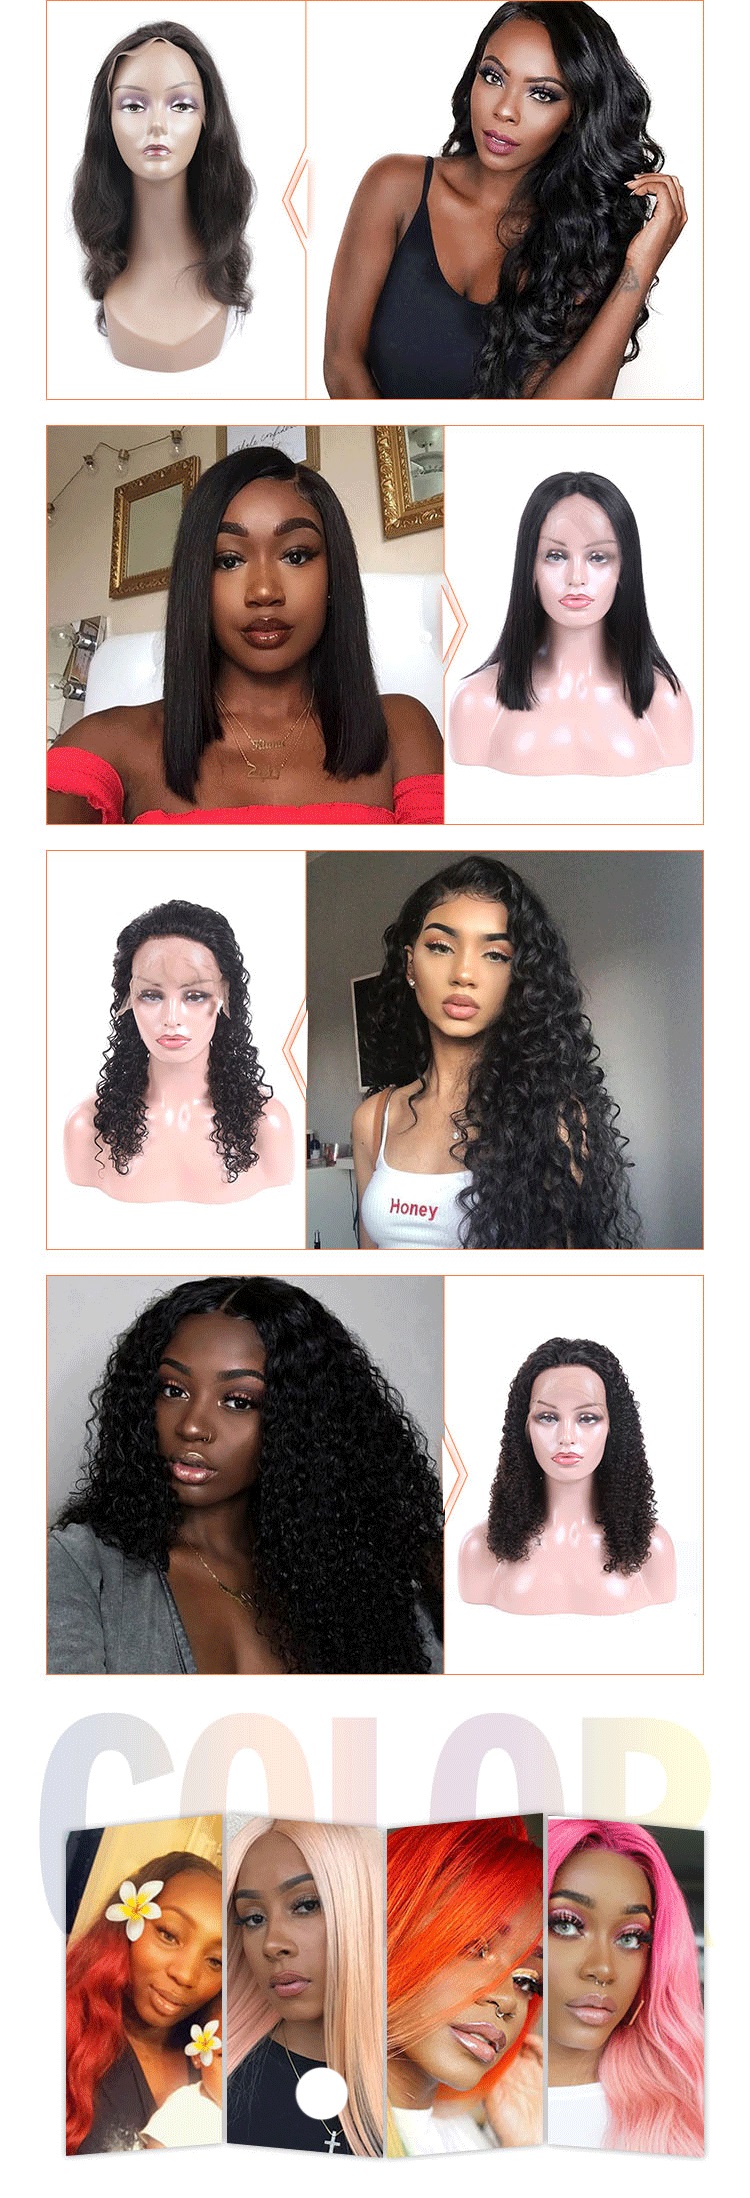 LSY Hair 100% Human Hair Wigs 150% Natural Color Wave Full Lace Wig With Natural Hair Line 28inch Wig